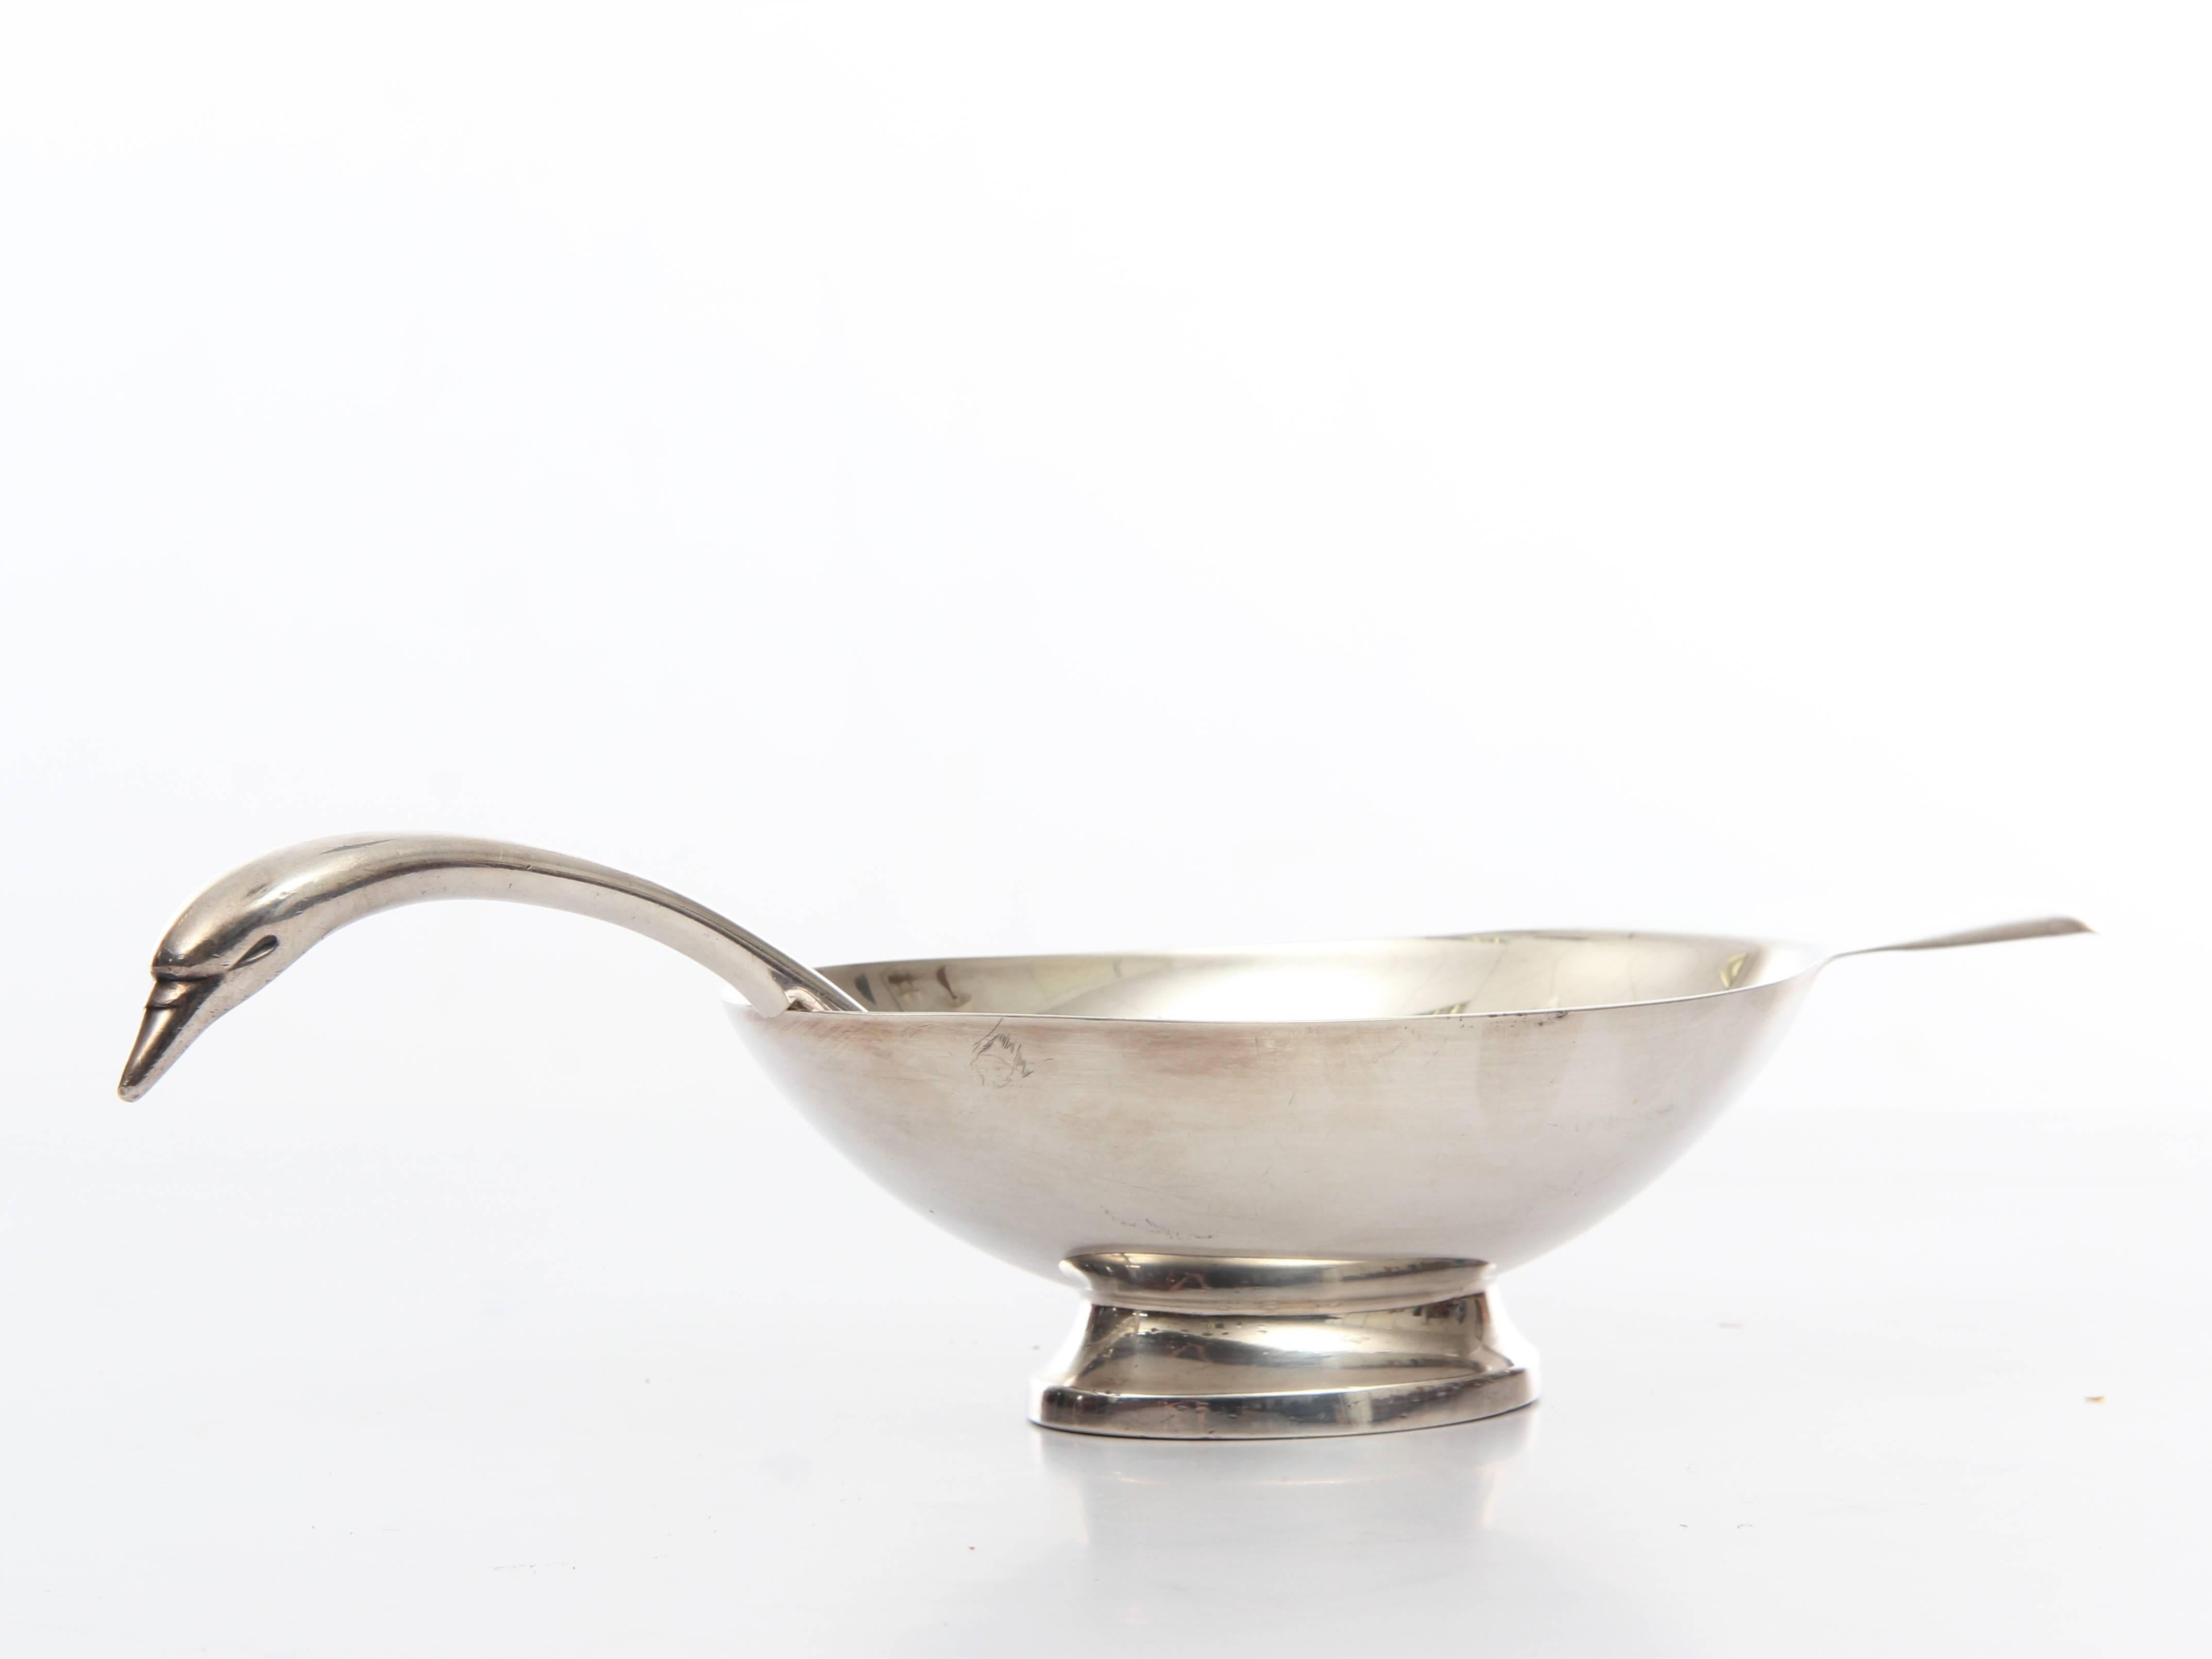 Christofle Gallia "Swan" sauceboat with serving ladle design by Christian Fjerdingstad (1891-1968) a Danish silversmith and design consultant for Christofle between 1924-1939.